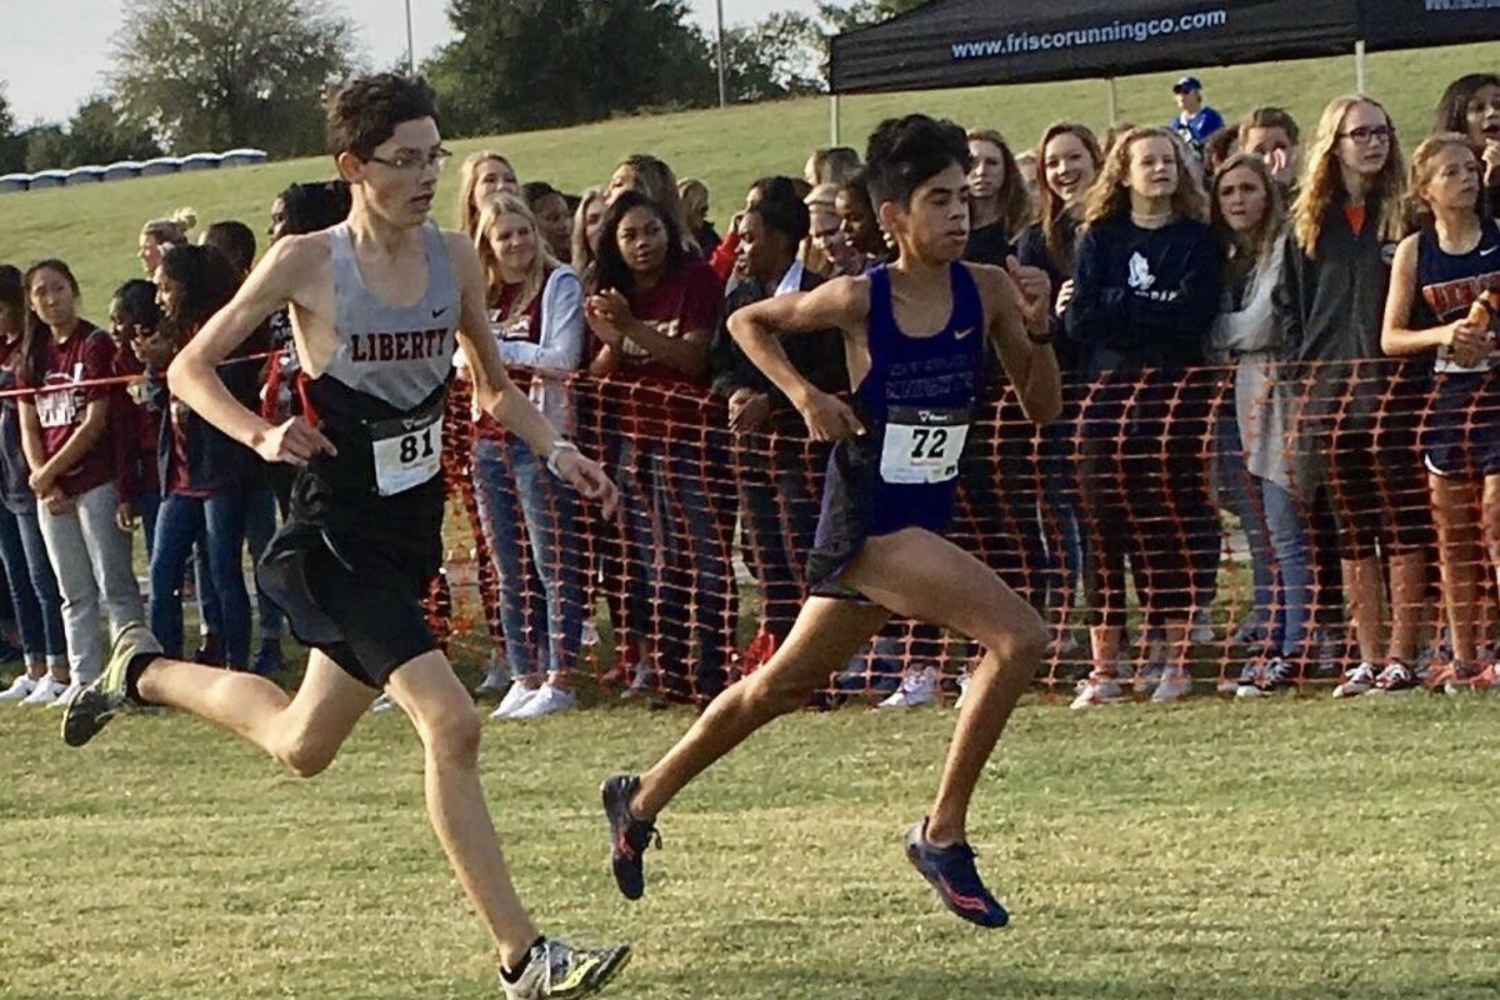 They boys cross country team was back in action Saturday morning. They placed second overall with an individuals placing 5th and 7th.